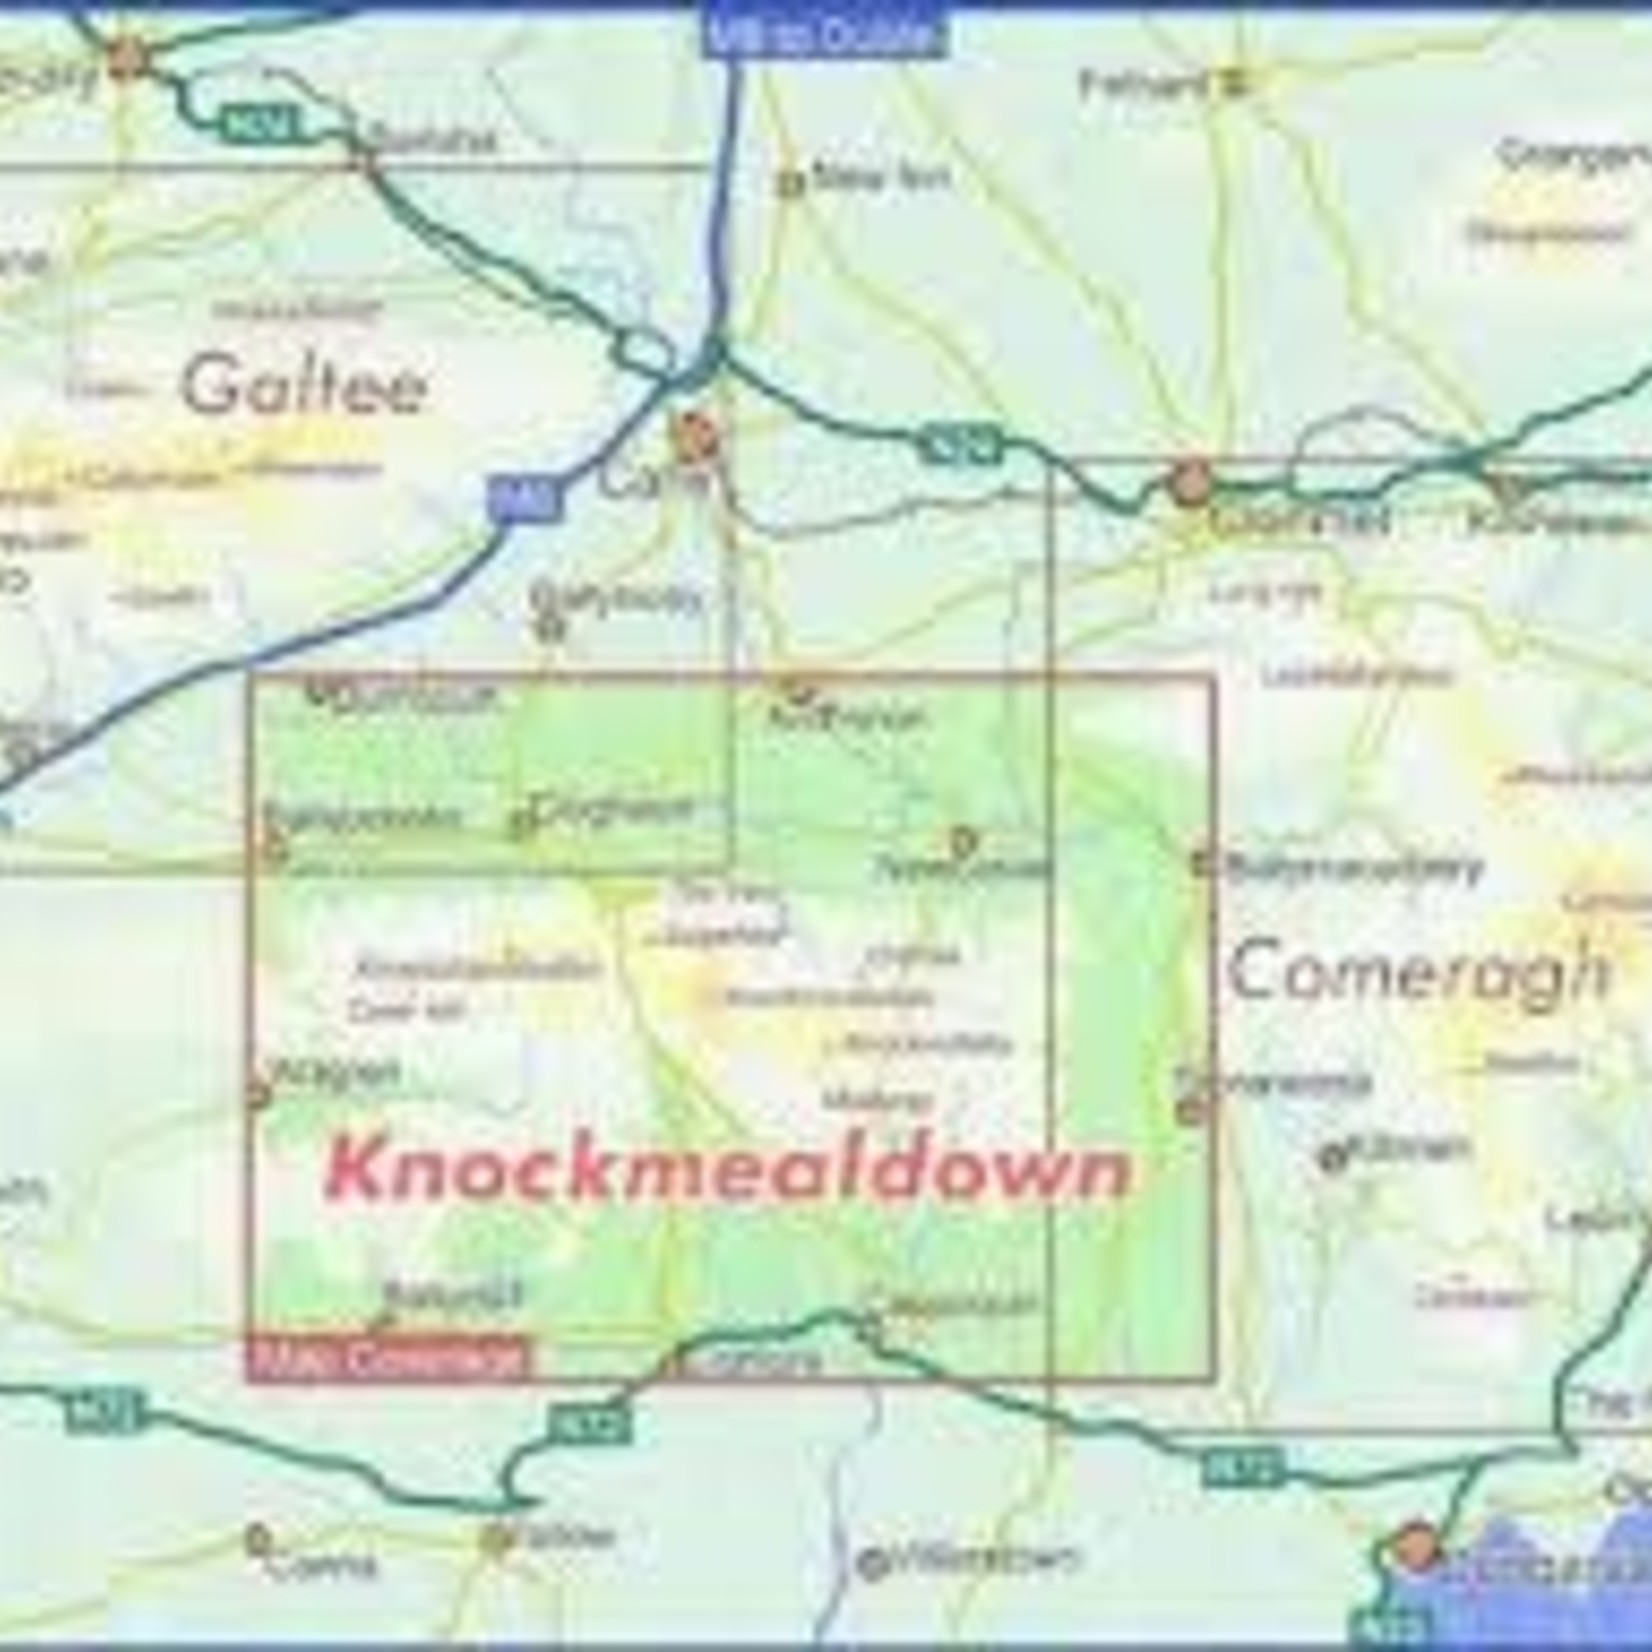 EastWest Mapping Knockmealdown 1:25000 Paper Map